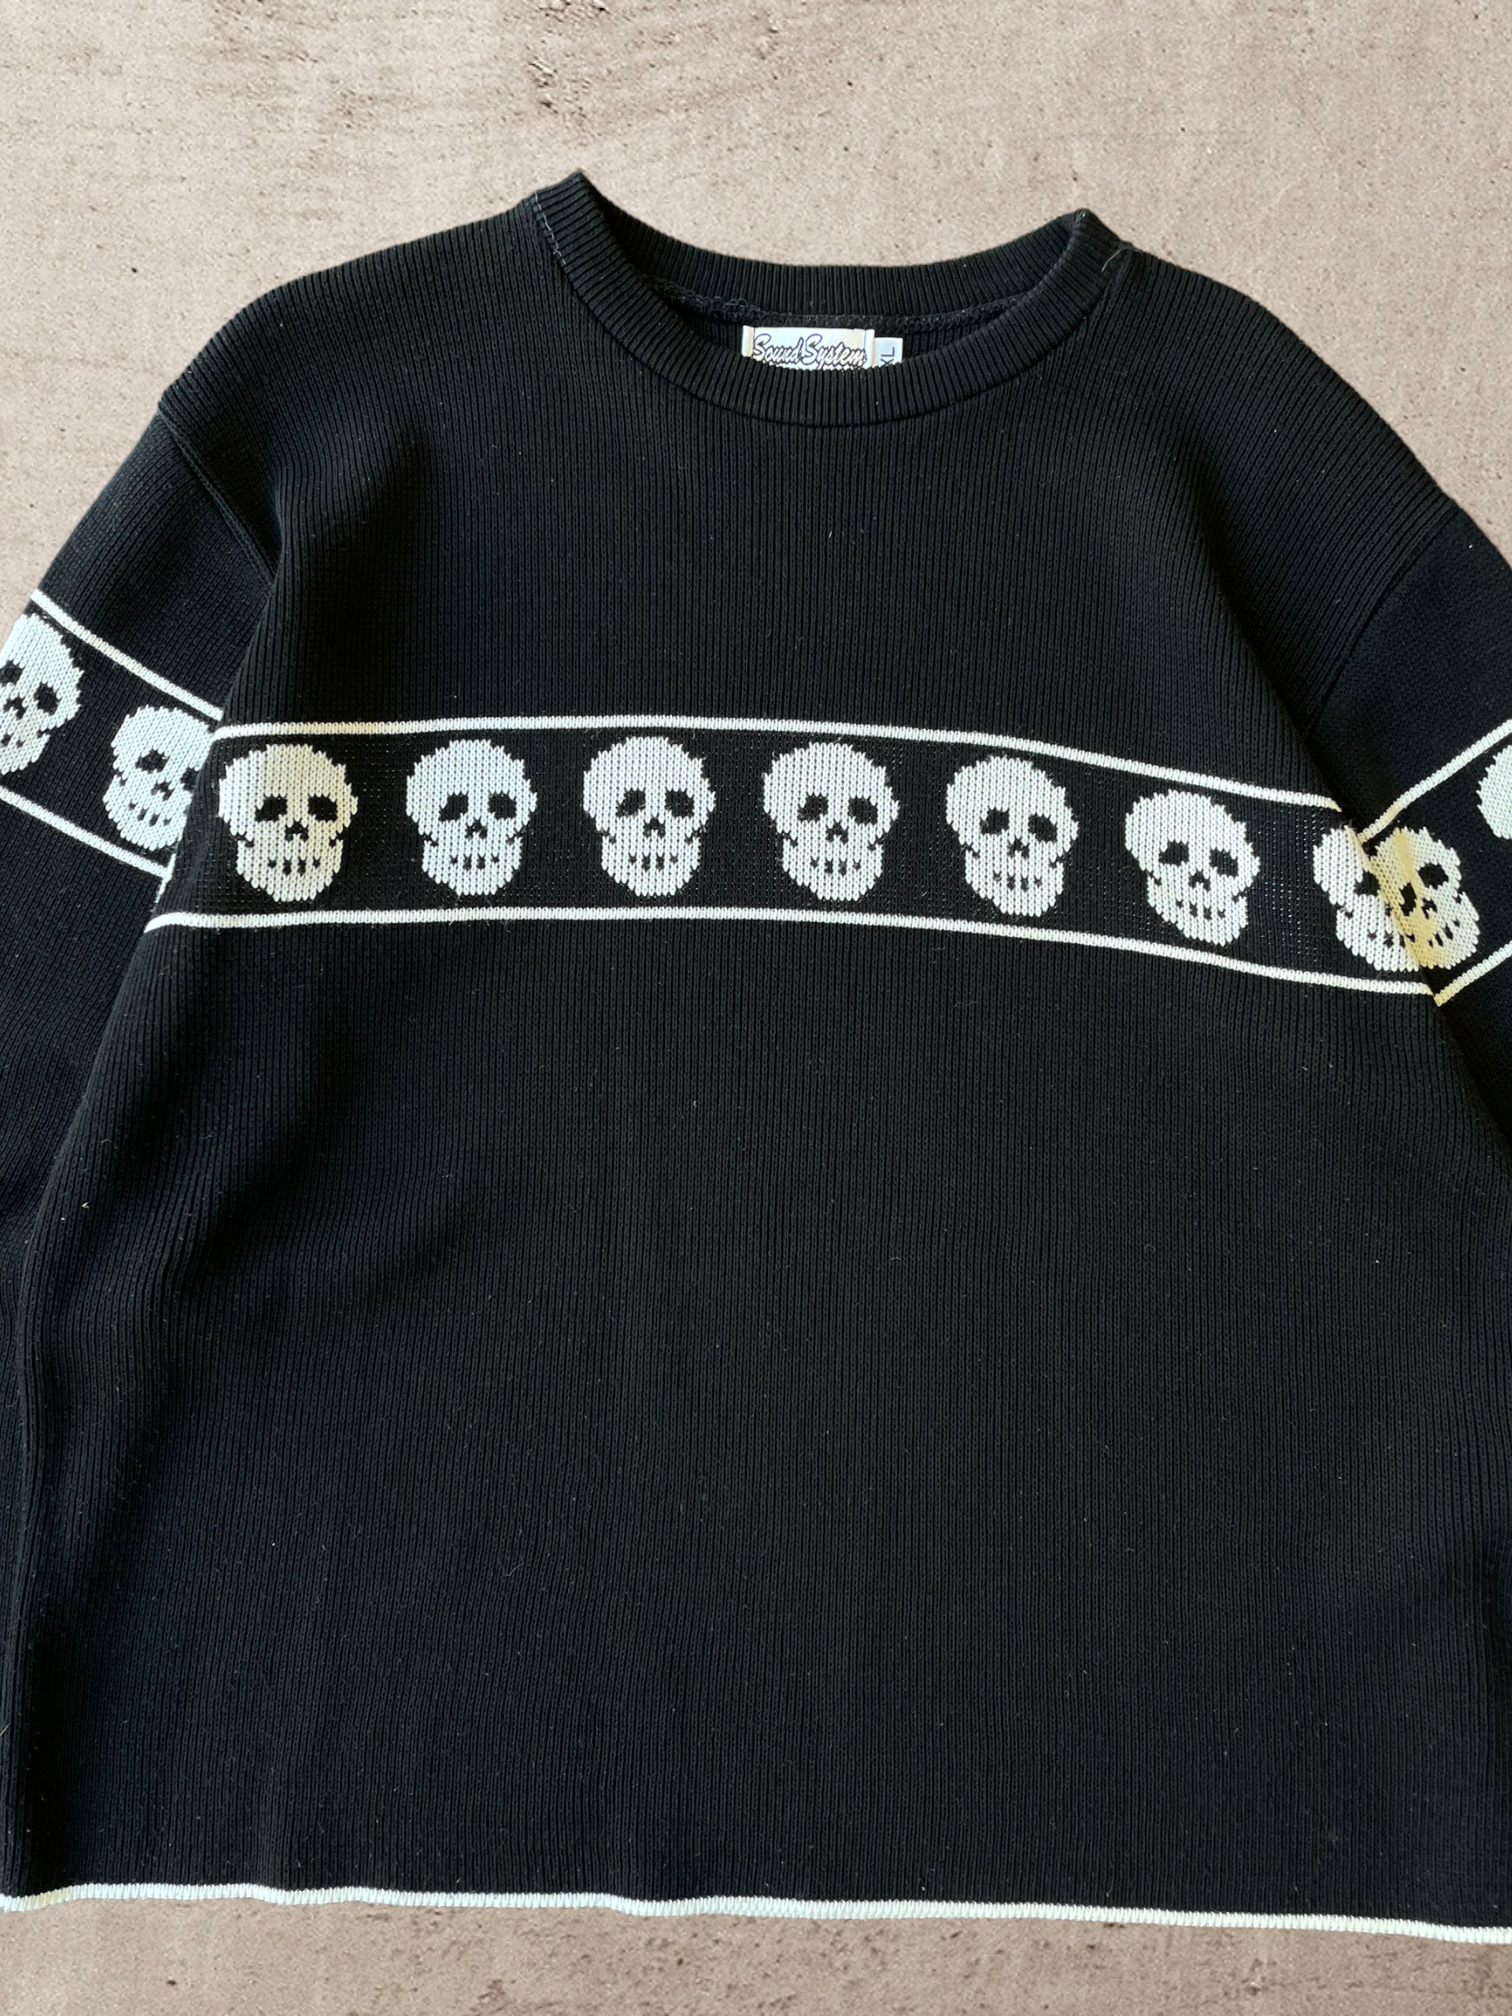 90s Skull Knit Sweater - Large